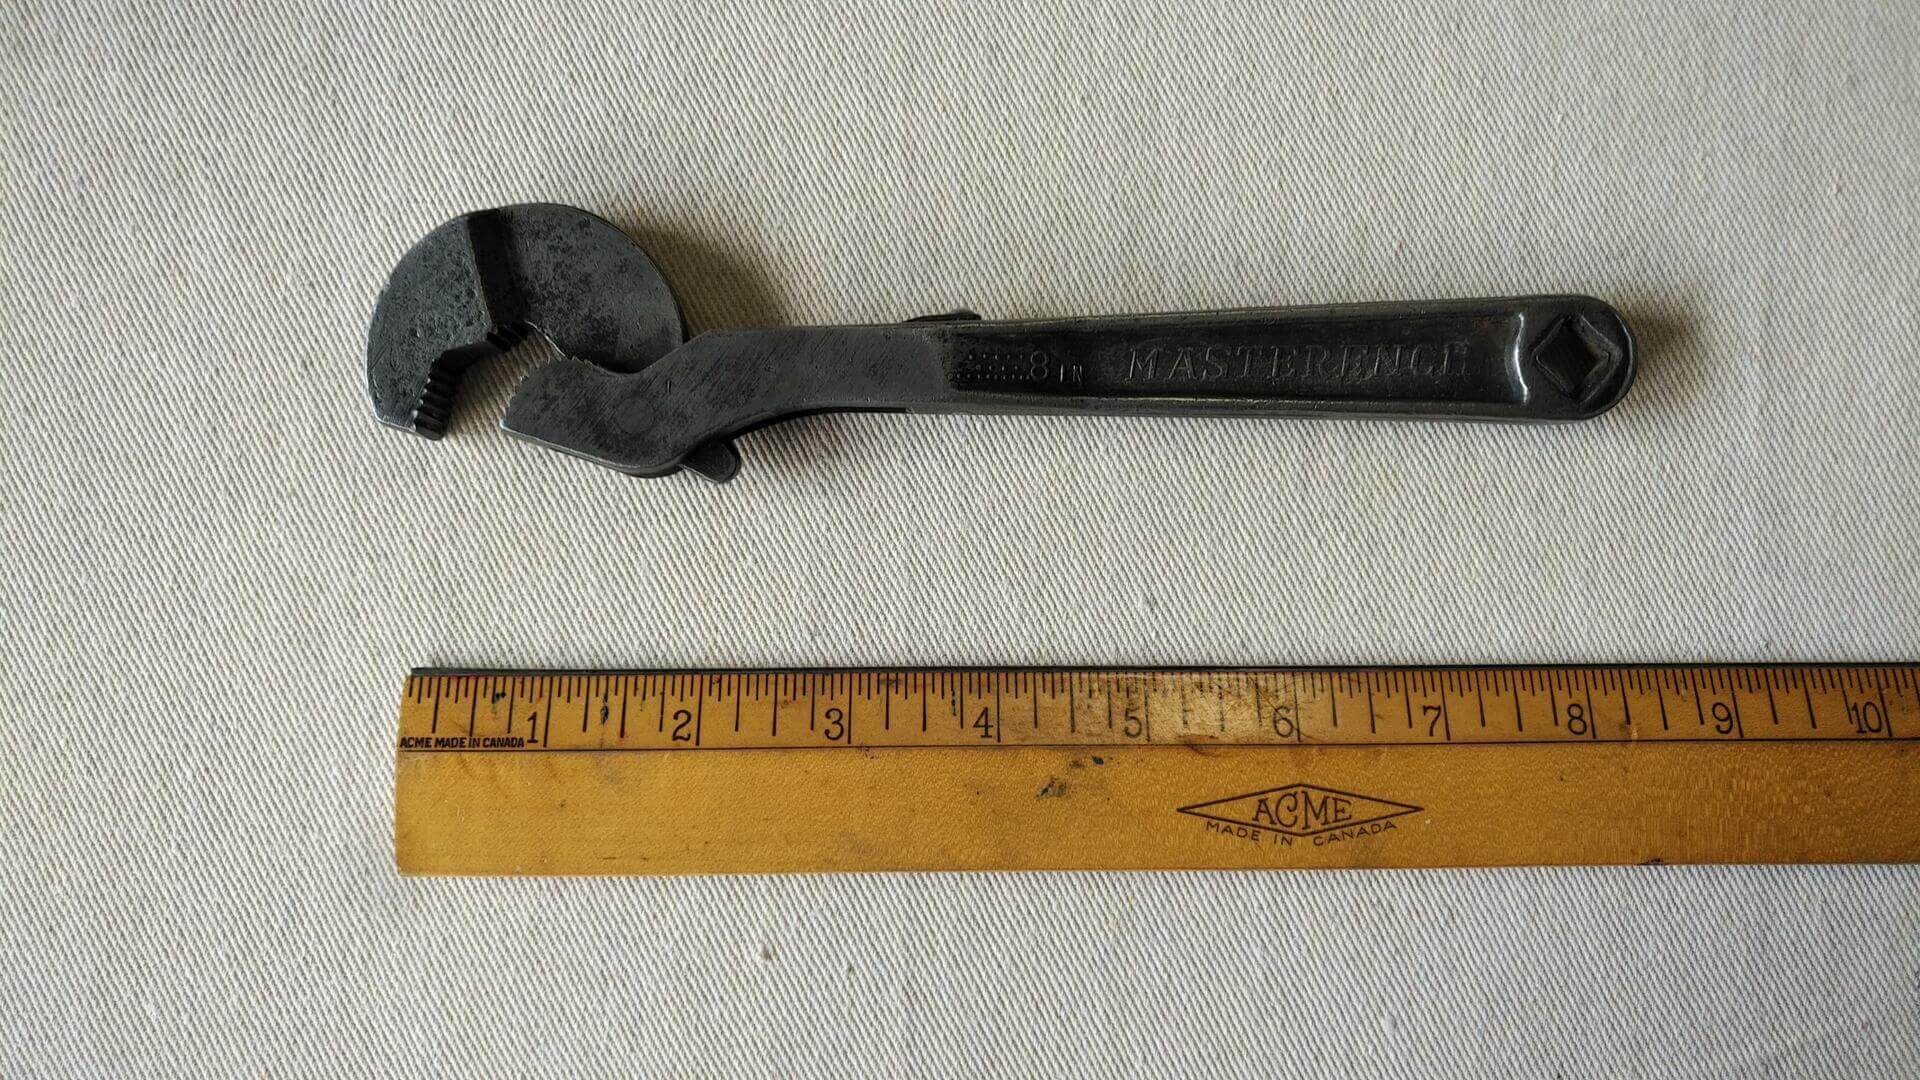 Nice vintage Heller Brothers 8 inch adjustable Masterench double jaw wrench. Antique made in USA collectible automotive and plumbing gripping hand tools